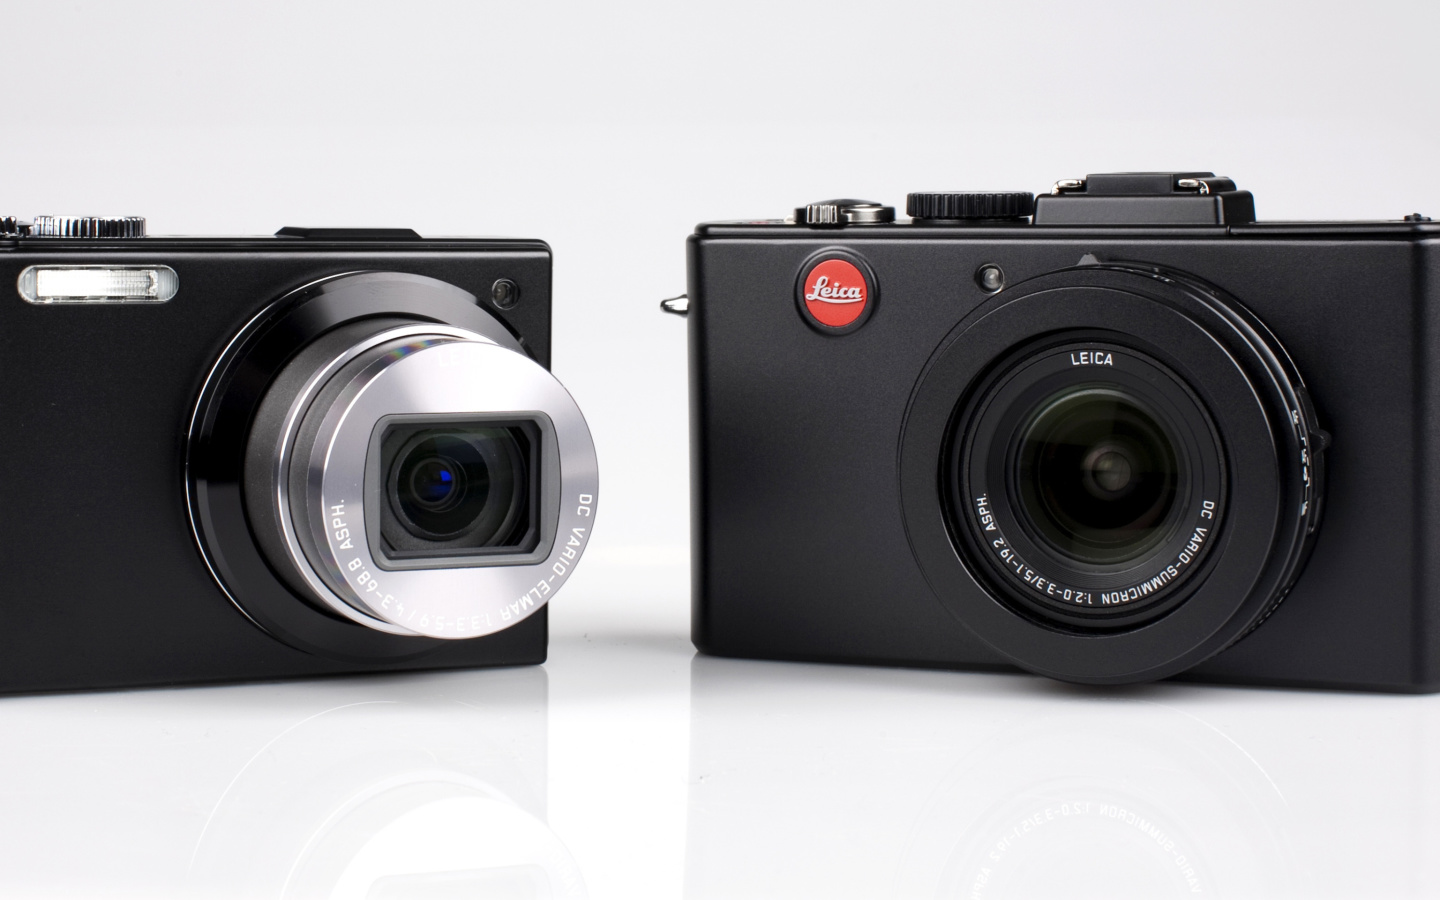 Leica D Lux 5 and Leica V LUX 1 wallpaper 1440x900